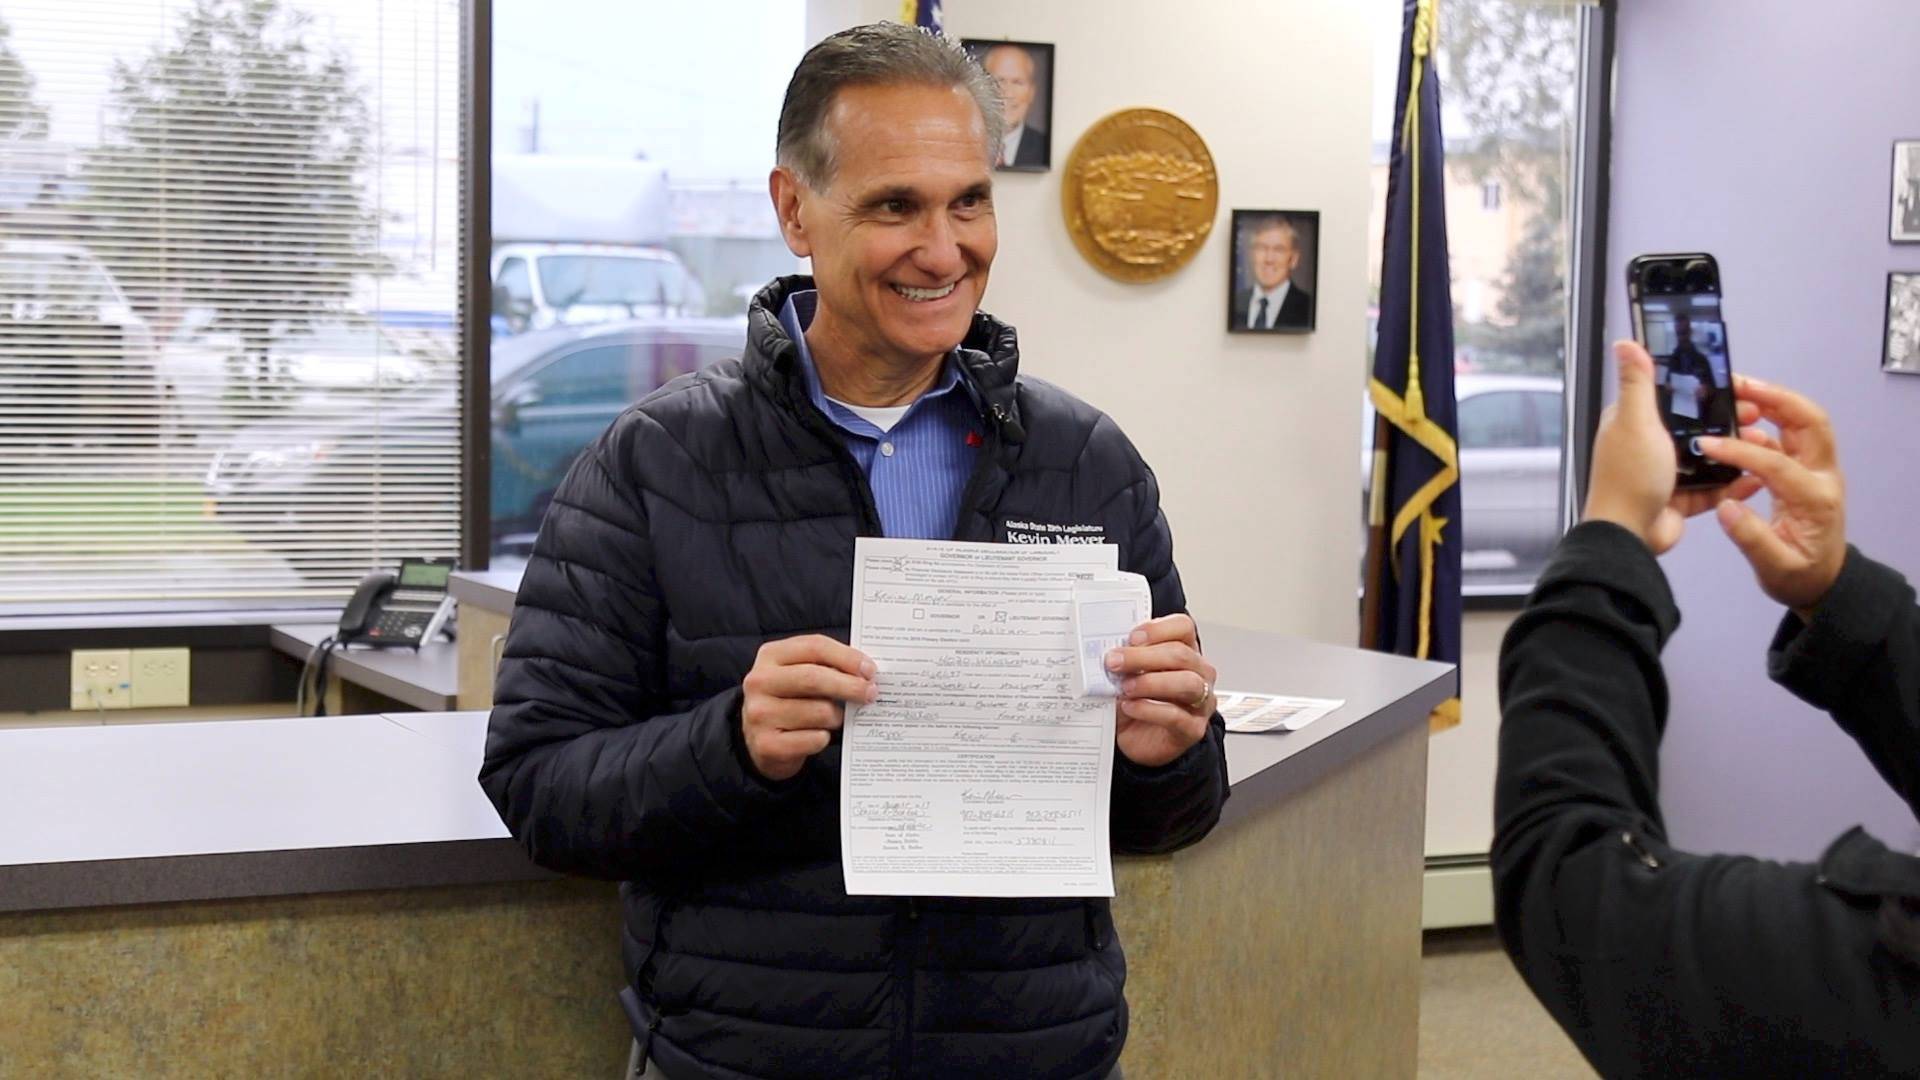 Sen. Kevin Meyer, R-Anchorage, poses for a photograph at the Anchorage office of the Alaska Division of Elections as he files to run for lieutenant governor. (Campaign of Kevin Meyer photo)